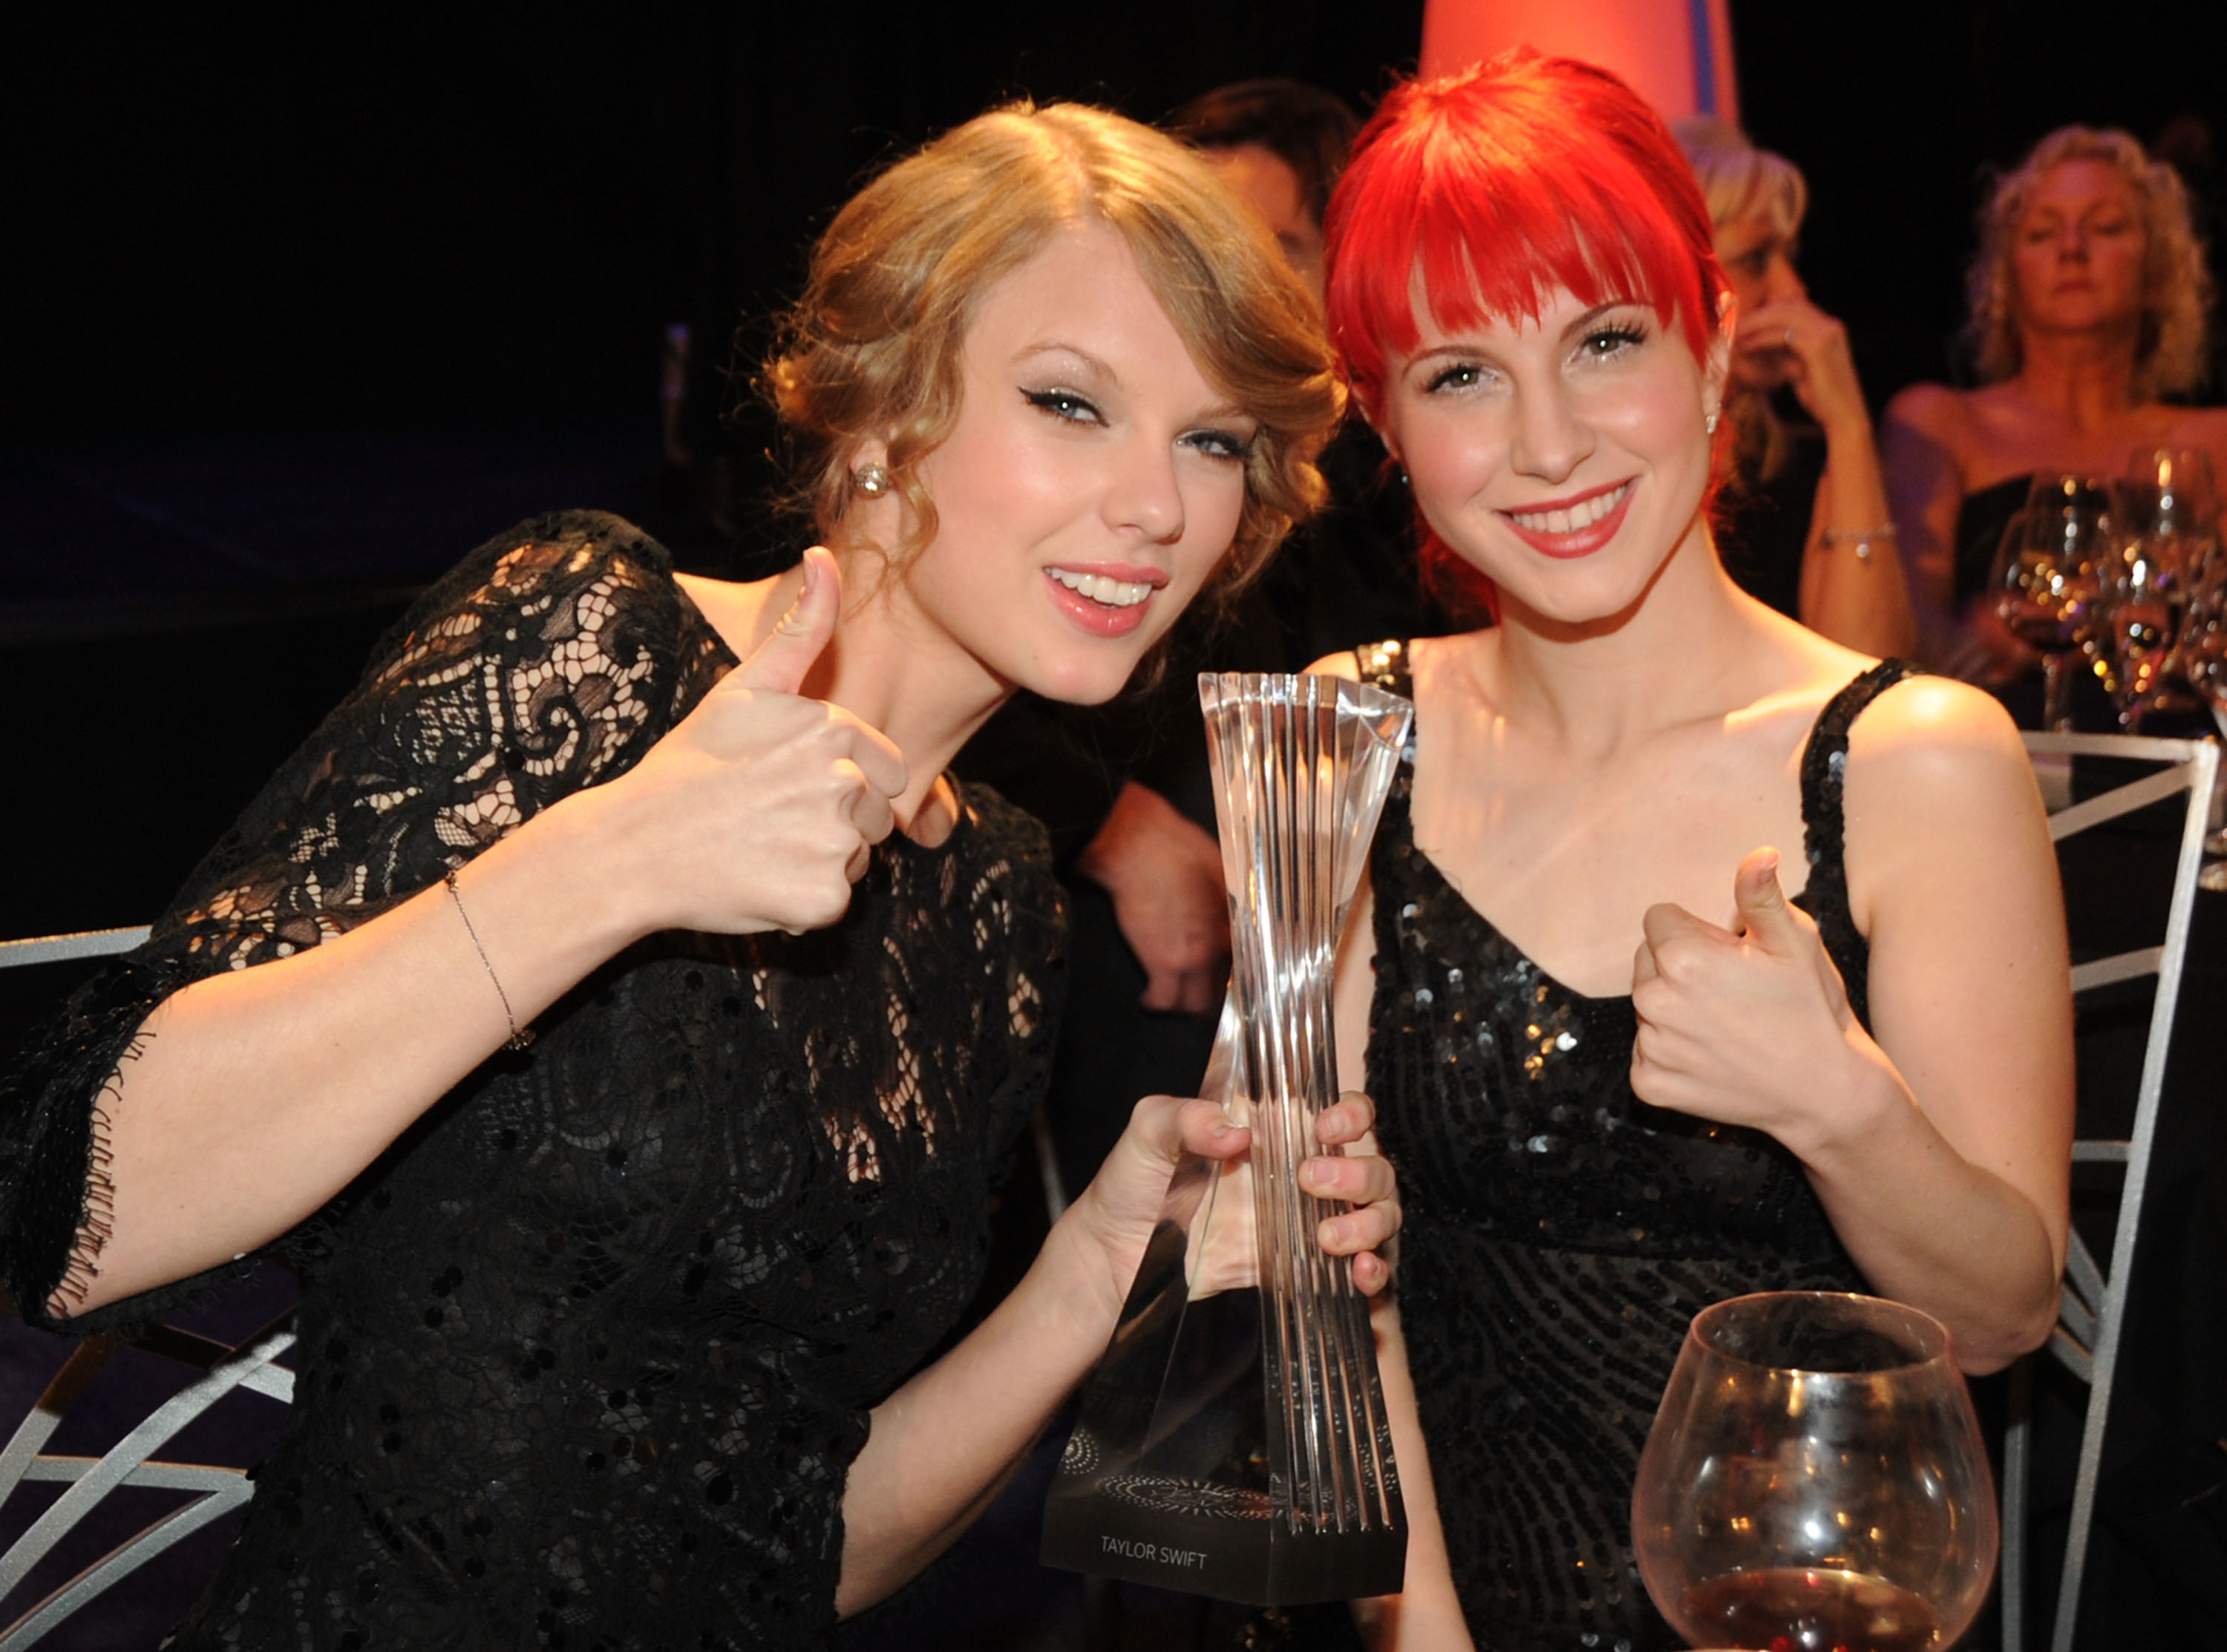 Close-up of Taylor and Hayley sitting together and smiling